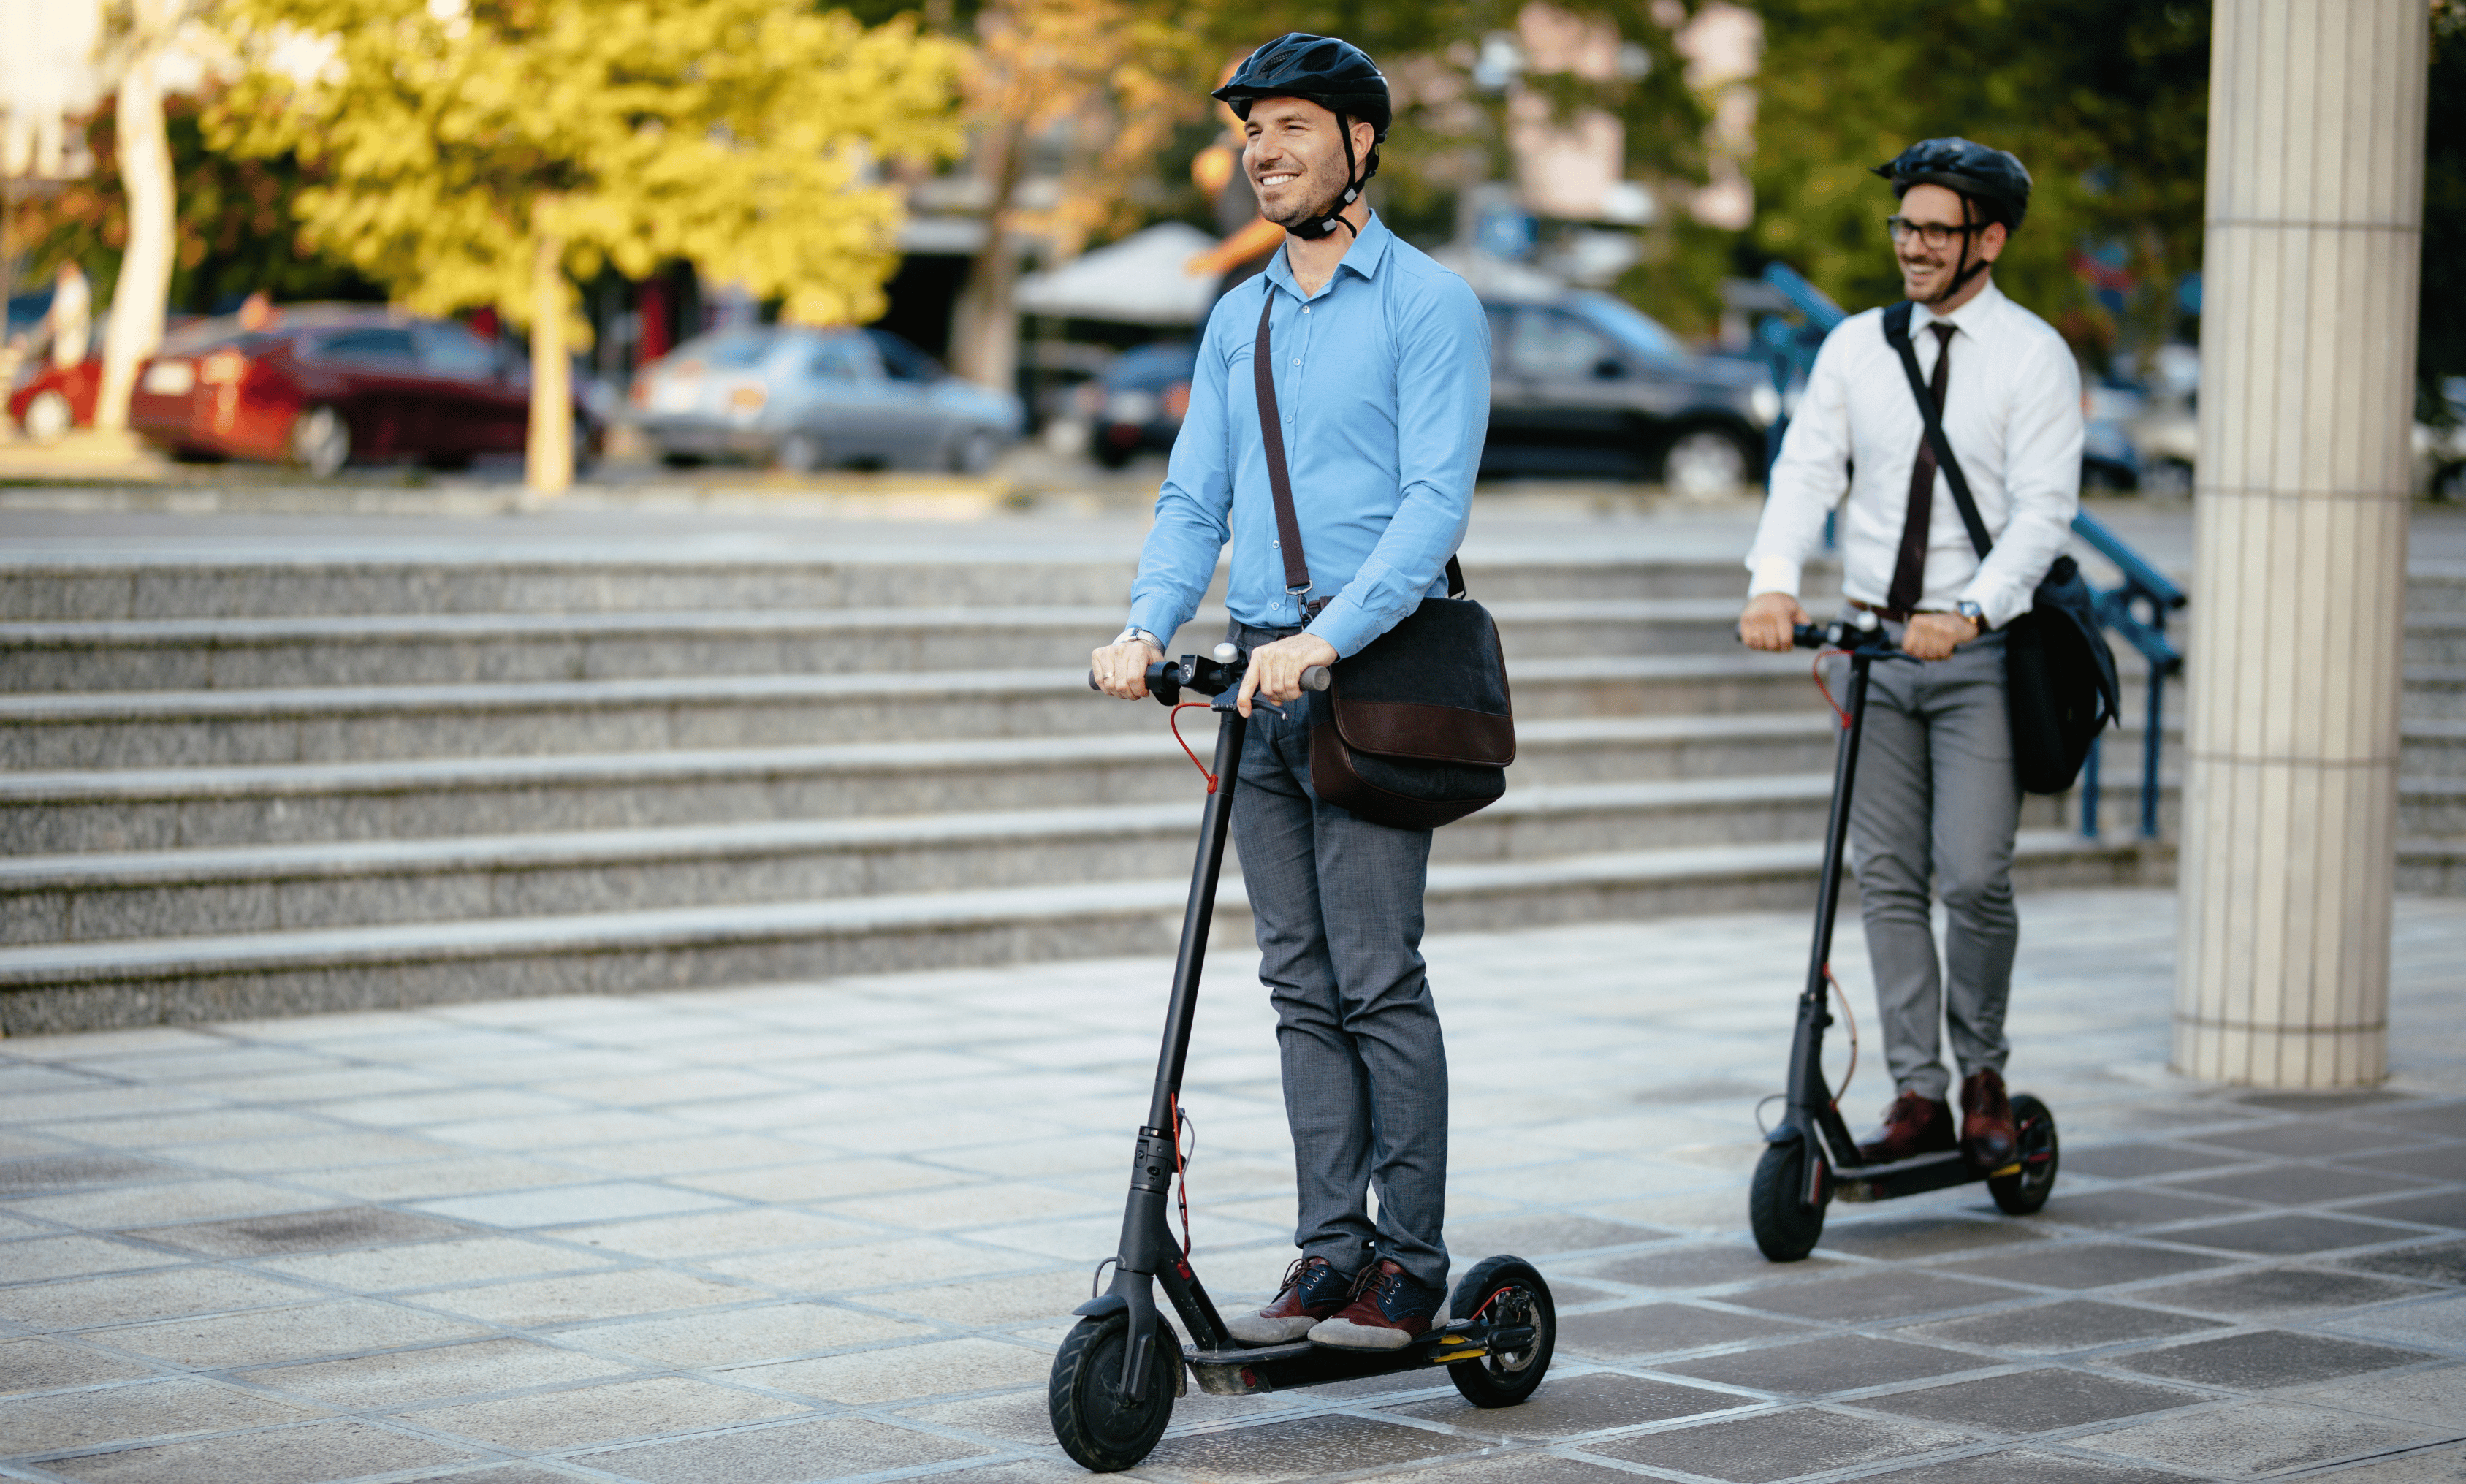 commuting on electric scooters